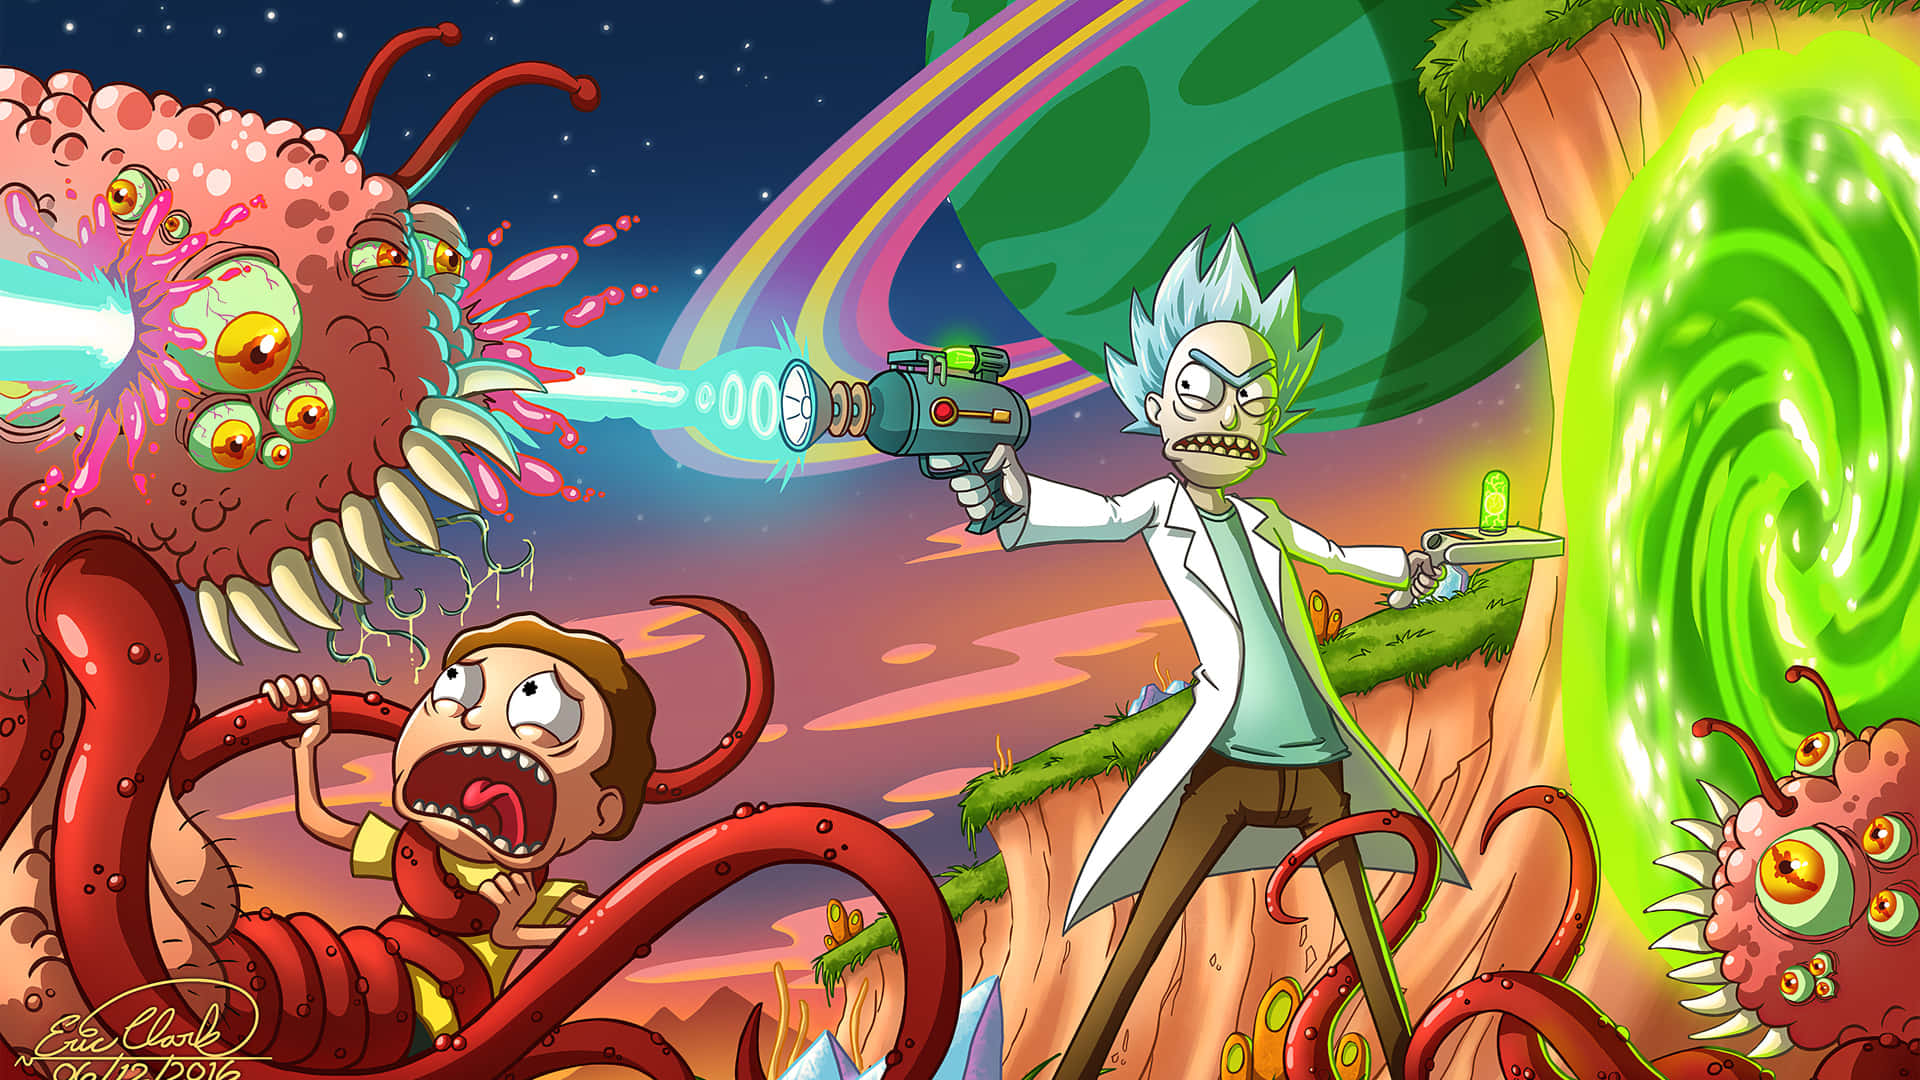 Go on a wacky interdimensional adventure with Rick and Morty on your laptop Wallpaper